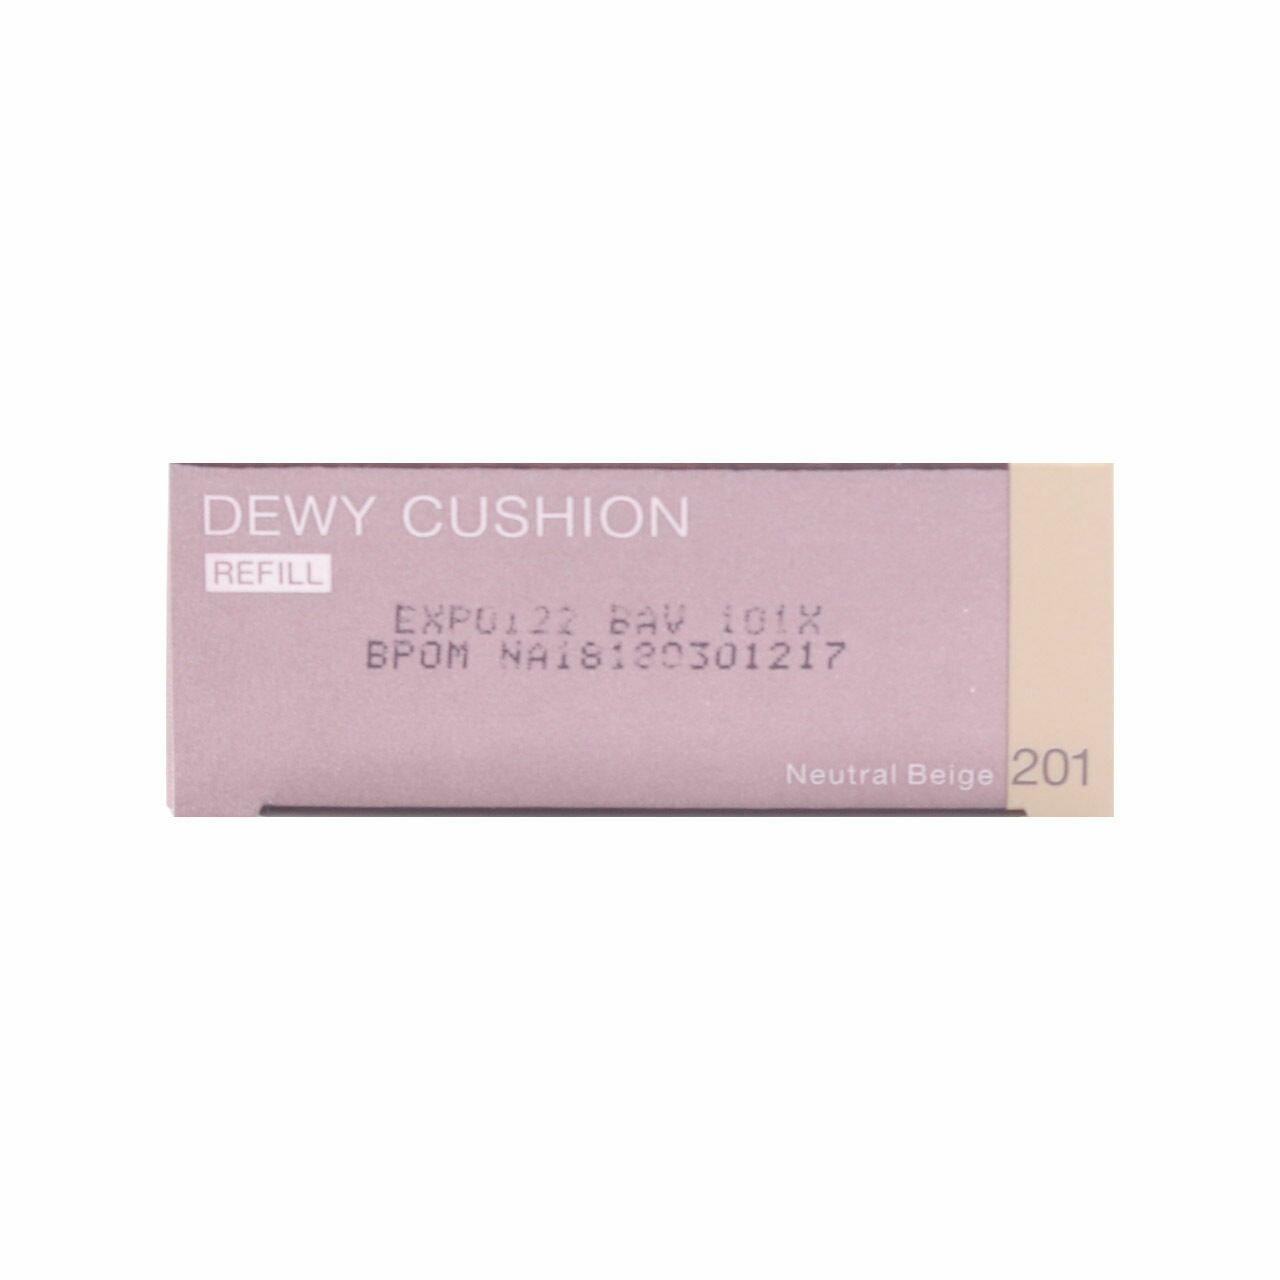 Pixy Dewy Cushion Refill SPF 23 PA++ 201 Neutral Beige Faces